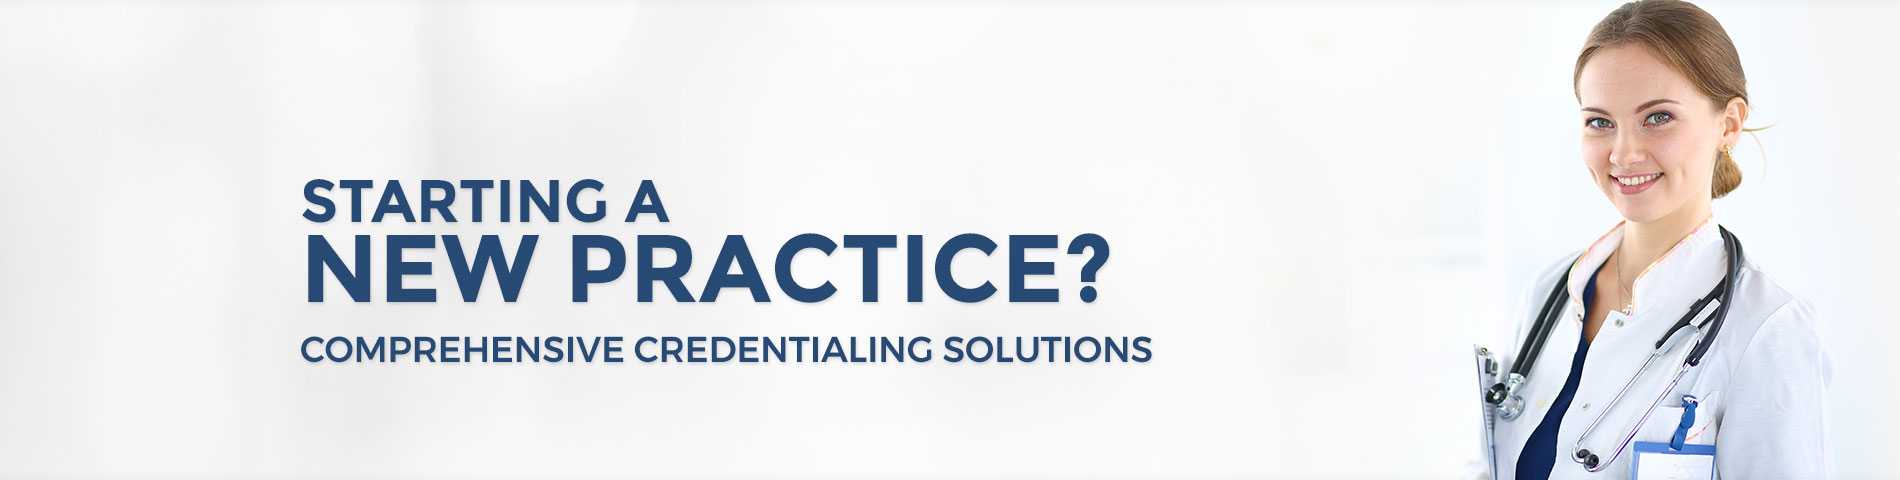 Medical Insurance Contracting & Credentialing